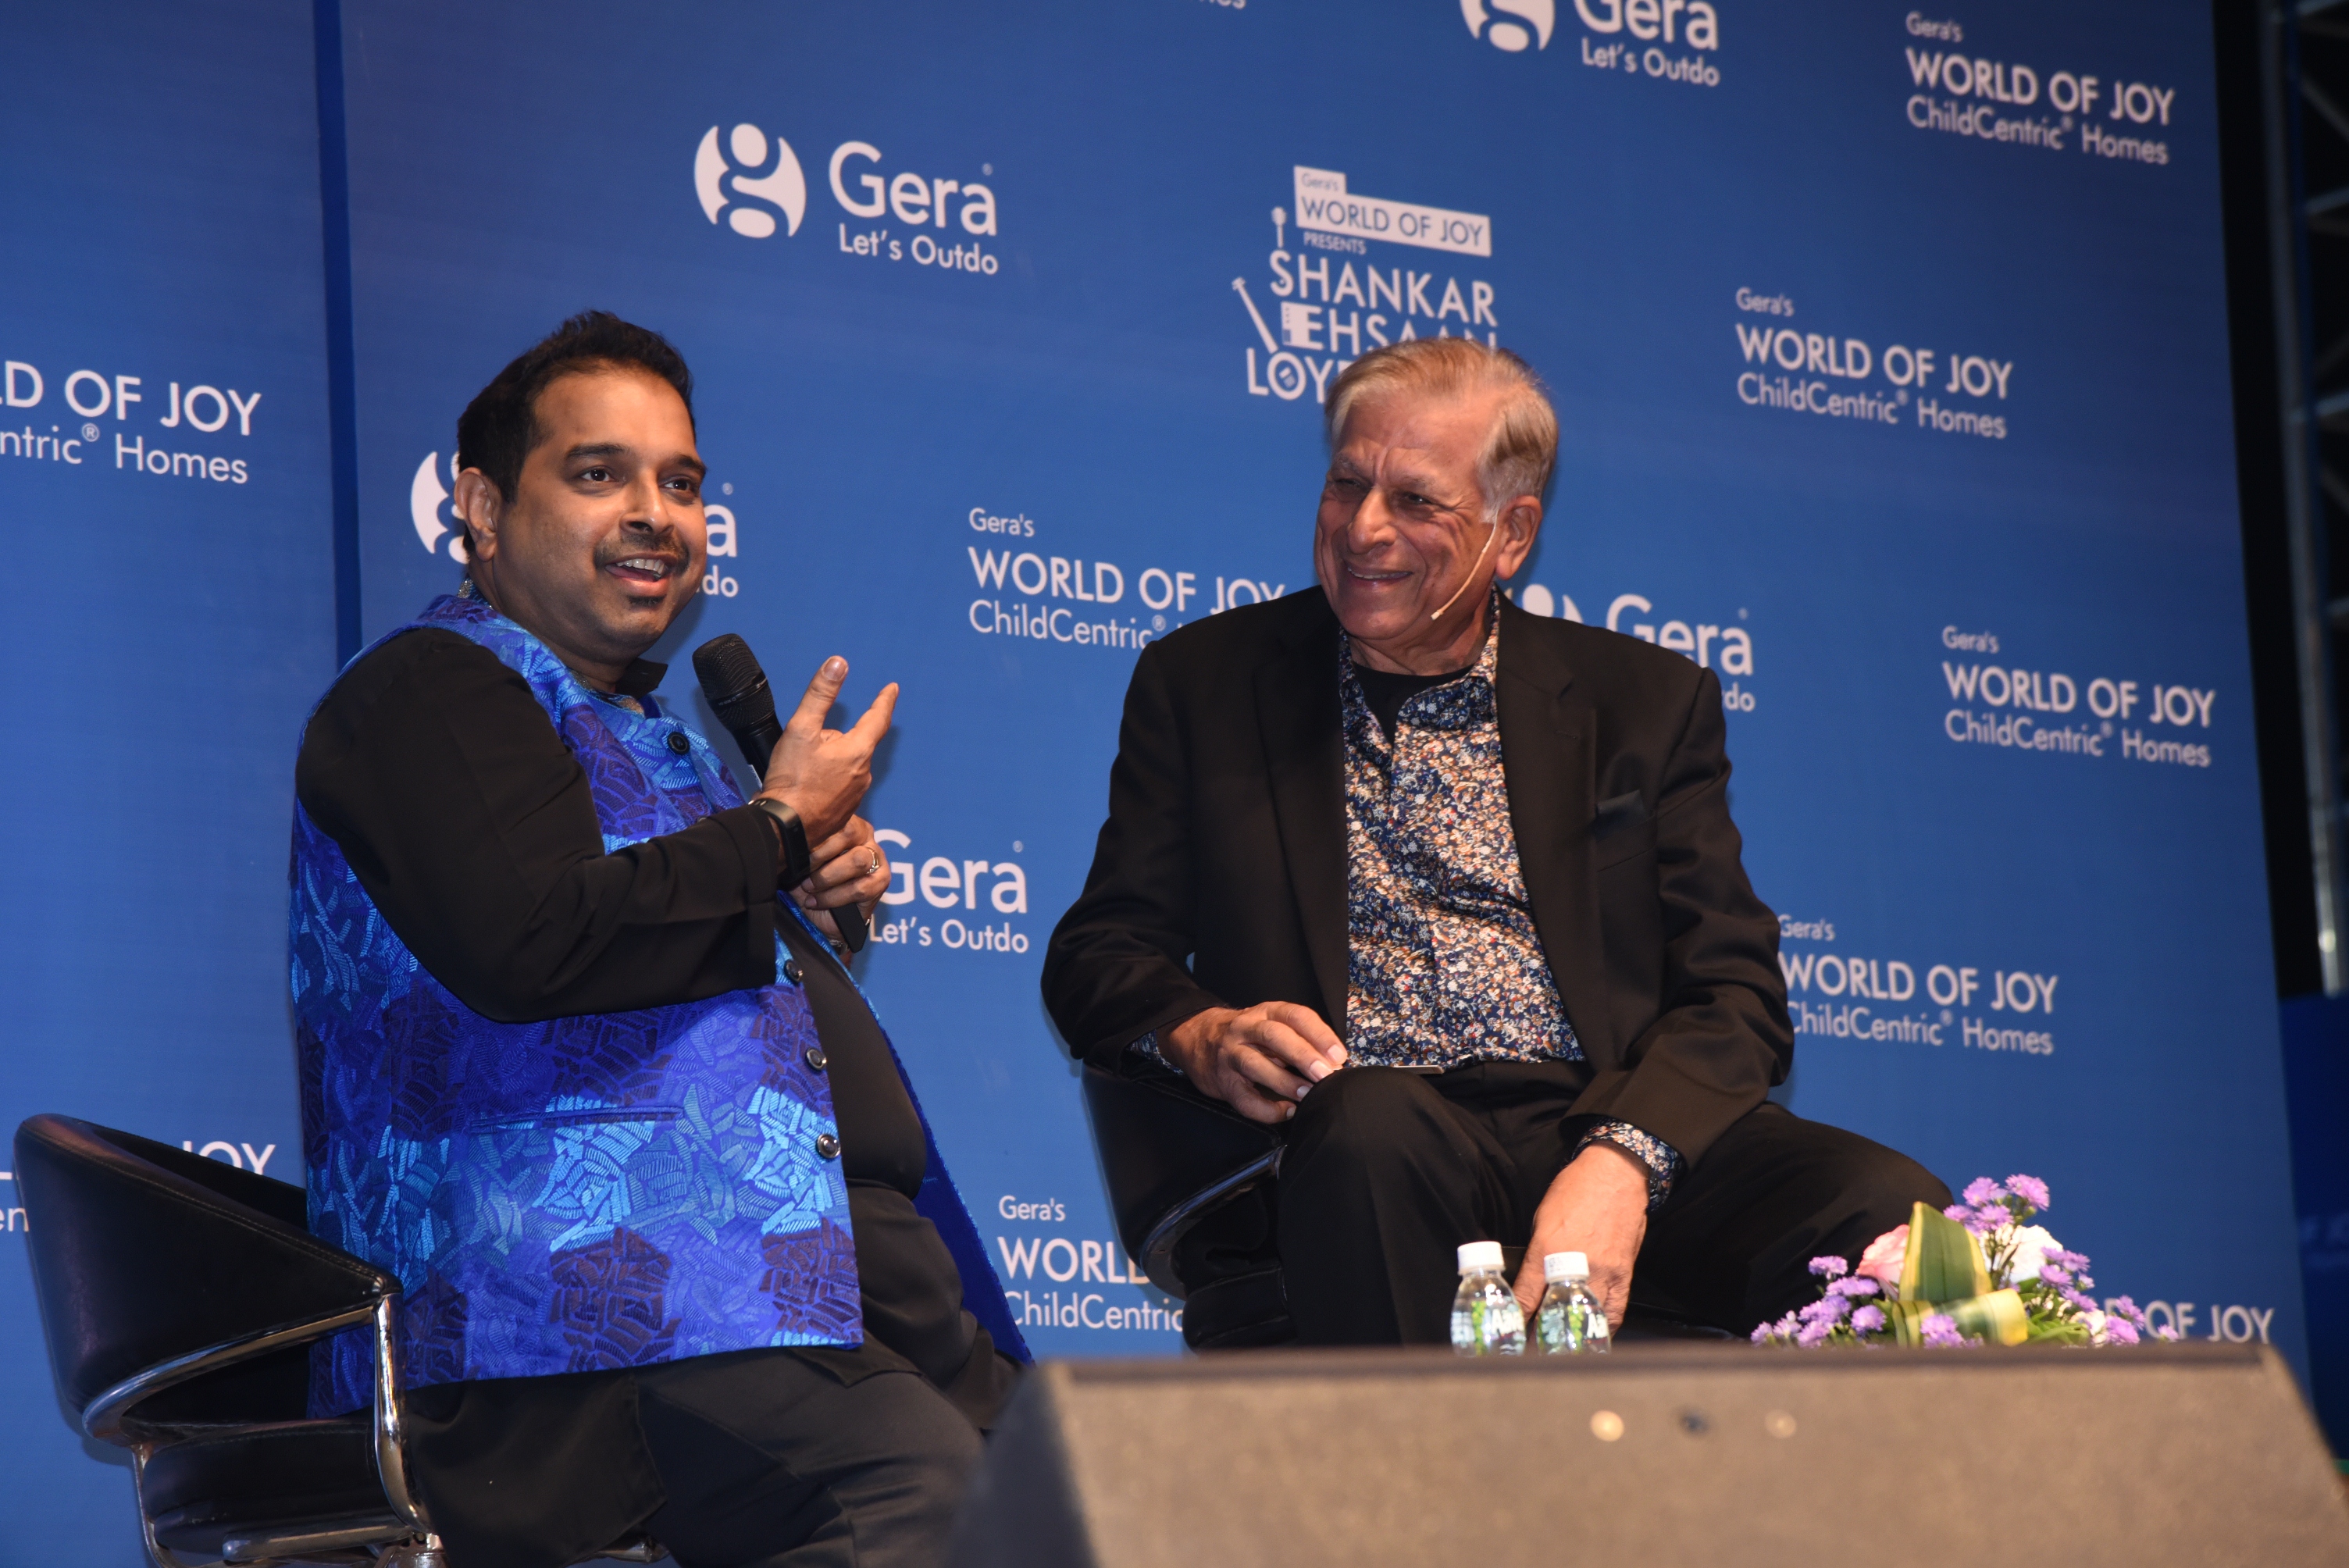 Celebrating the foundation laying of Gera's newest ChildCentric ® Homes project - Gera's World of Joy, with a live private concert by Shankar-Ehsaan-Loy-